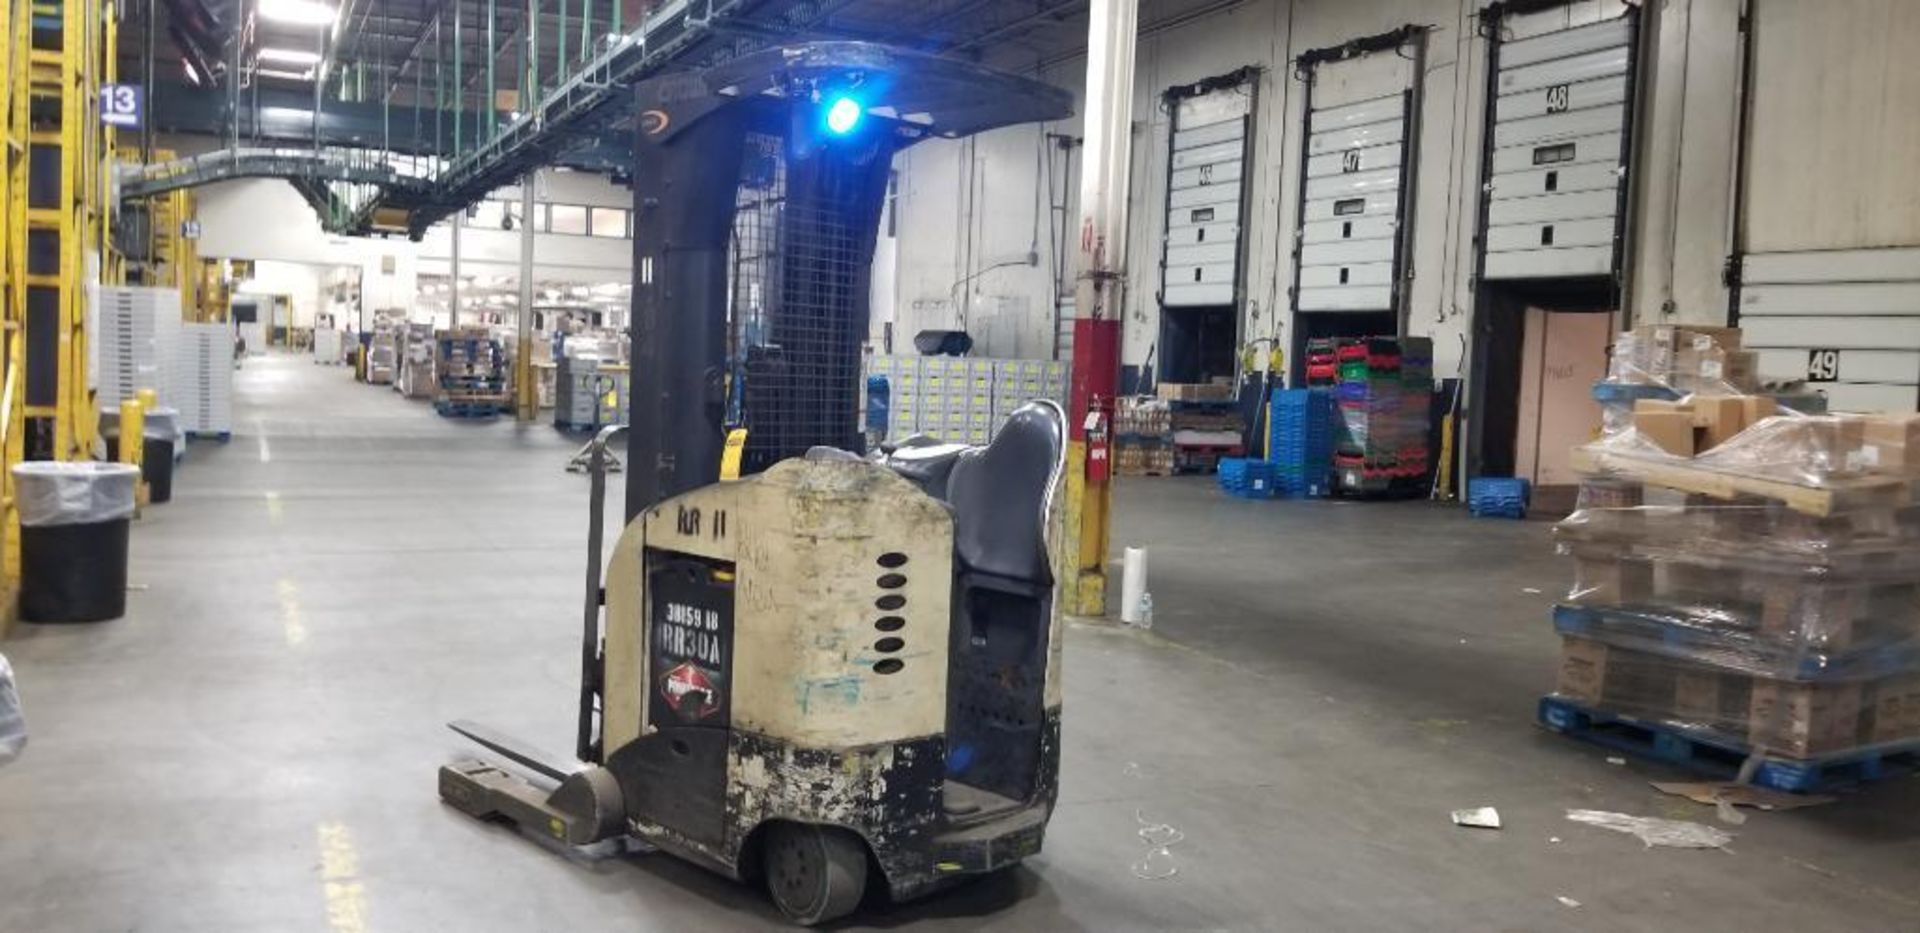 Crown RR 5200 Series Electric Reach Truck, Model RR5220-45, S/N. 1A274892, 4,500 LB. Lift Capacity, - Image 3 of 8